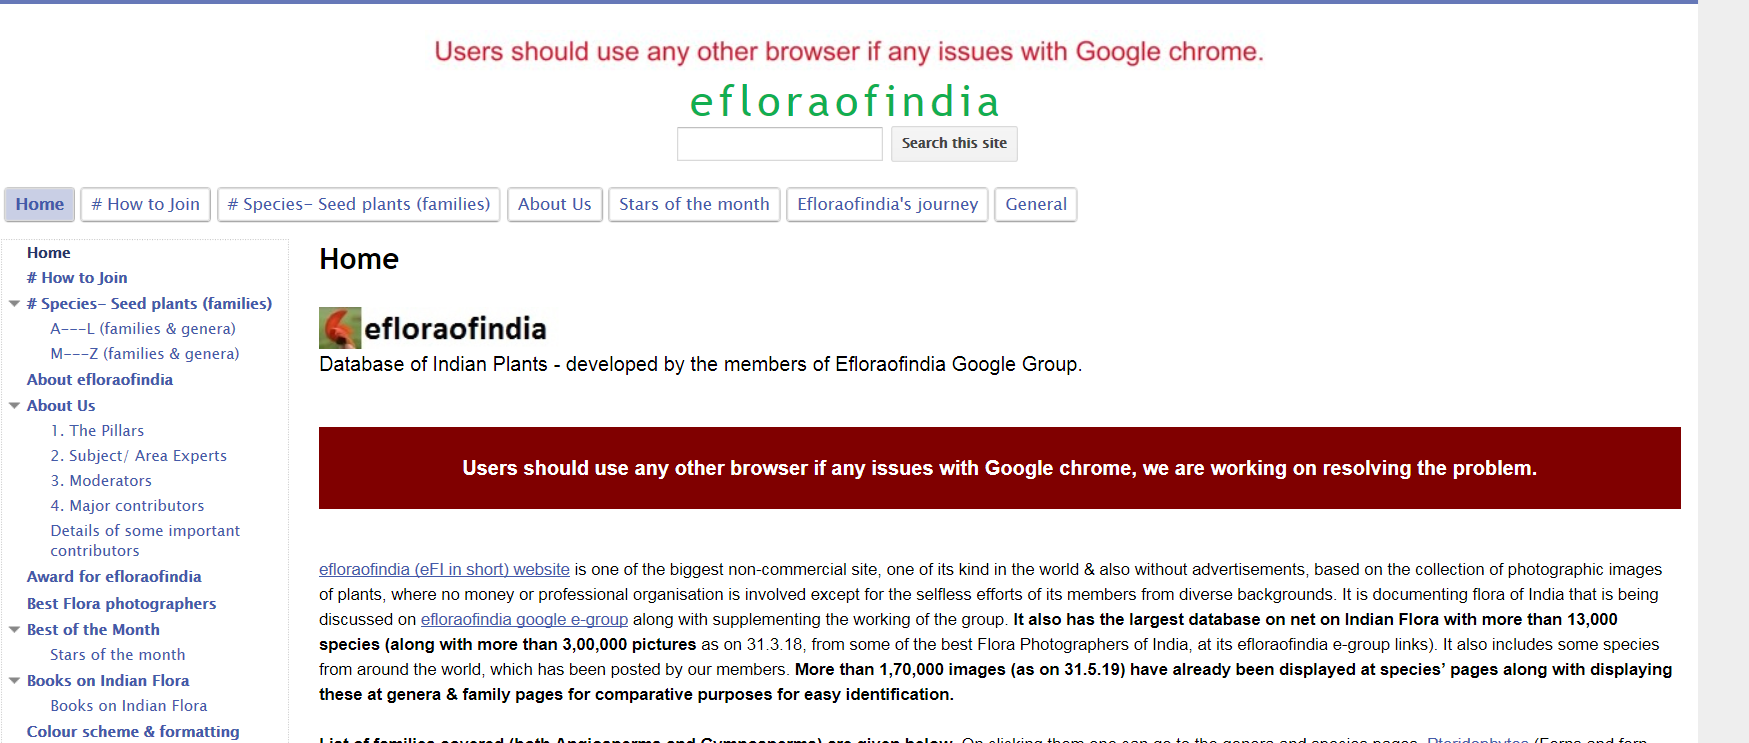 efloraindia Home page on 9 12 2019.png